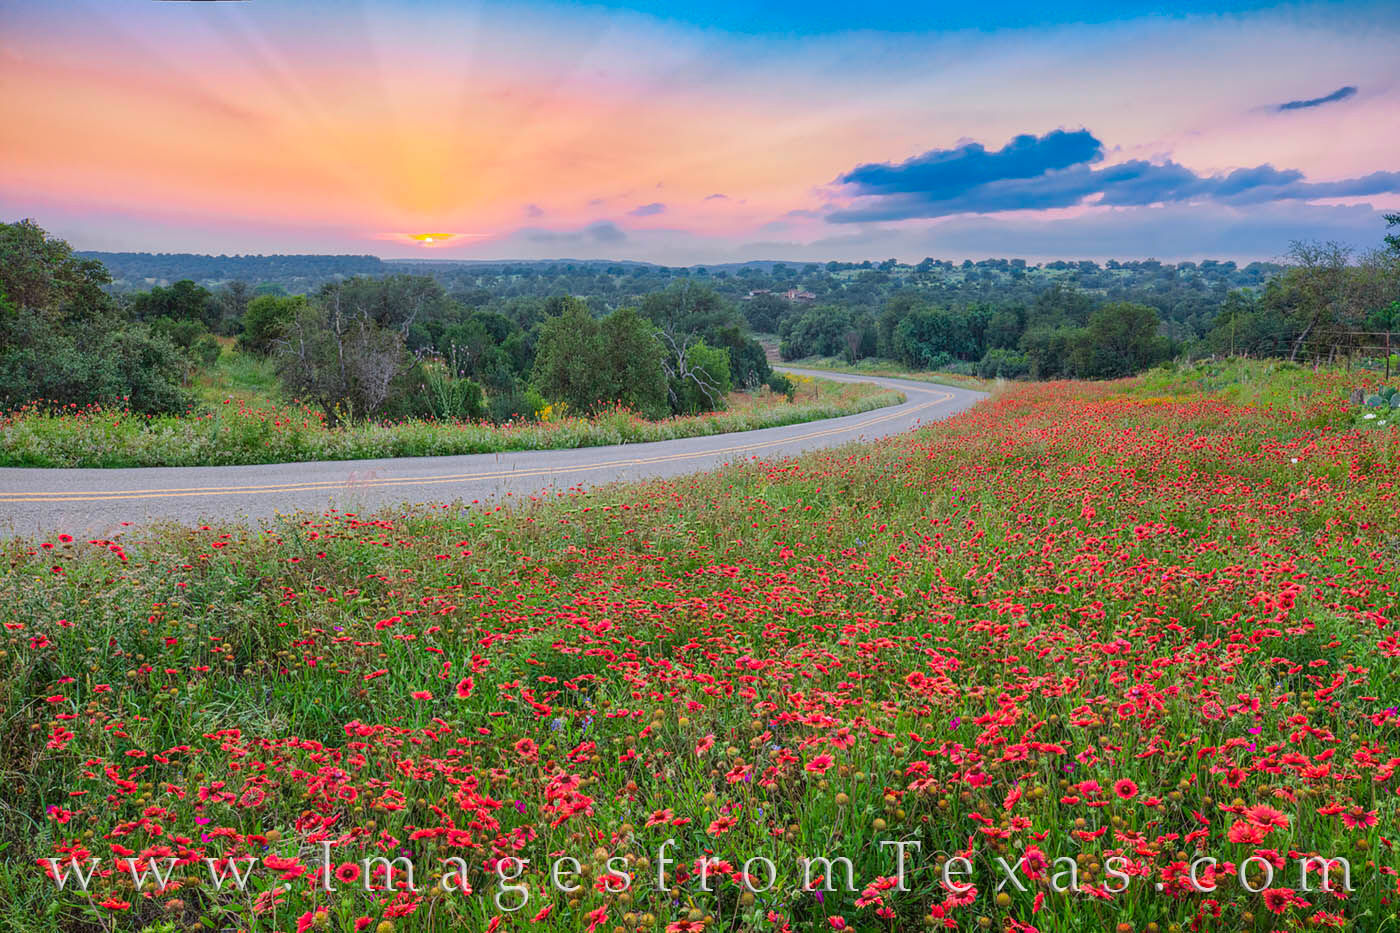 I had to pull over to take in this beautiful sunset in the hill country. Indian Blankets (firewheels), a colorful sunset, and...